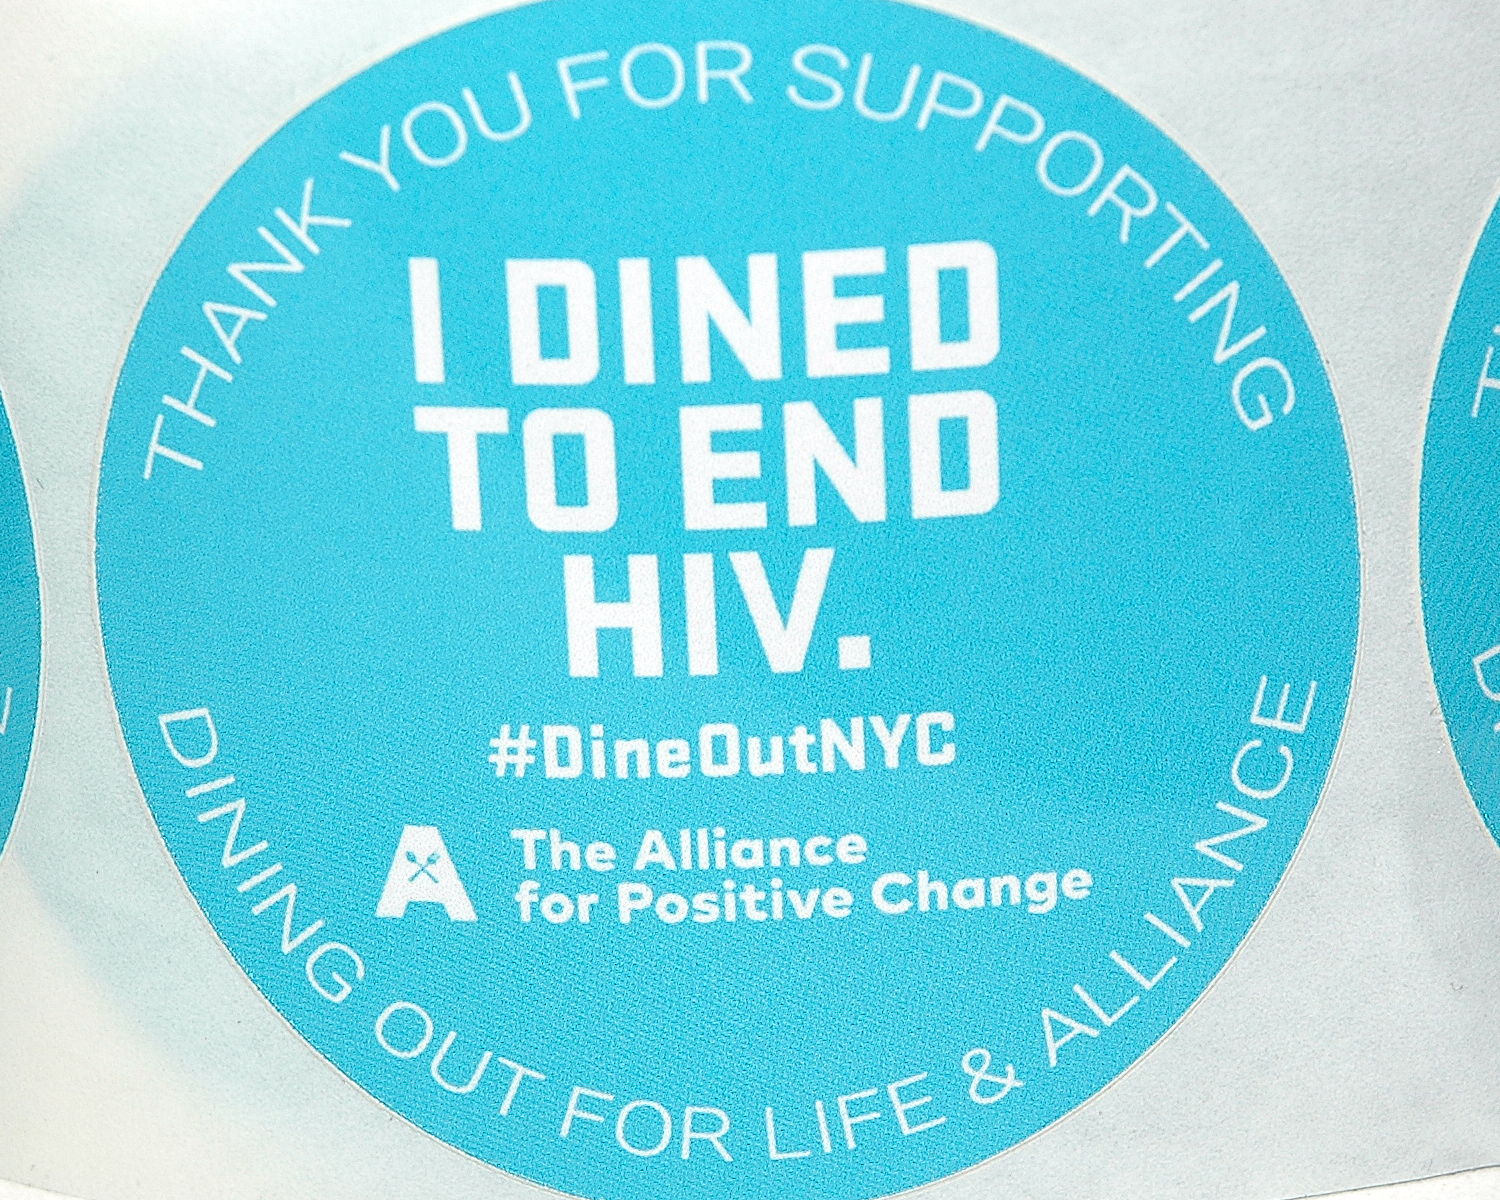 Thank You For Supporting Dining Out For Life and Alliance